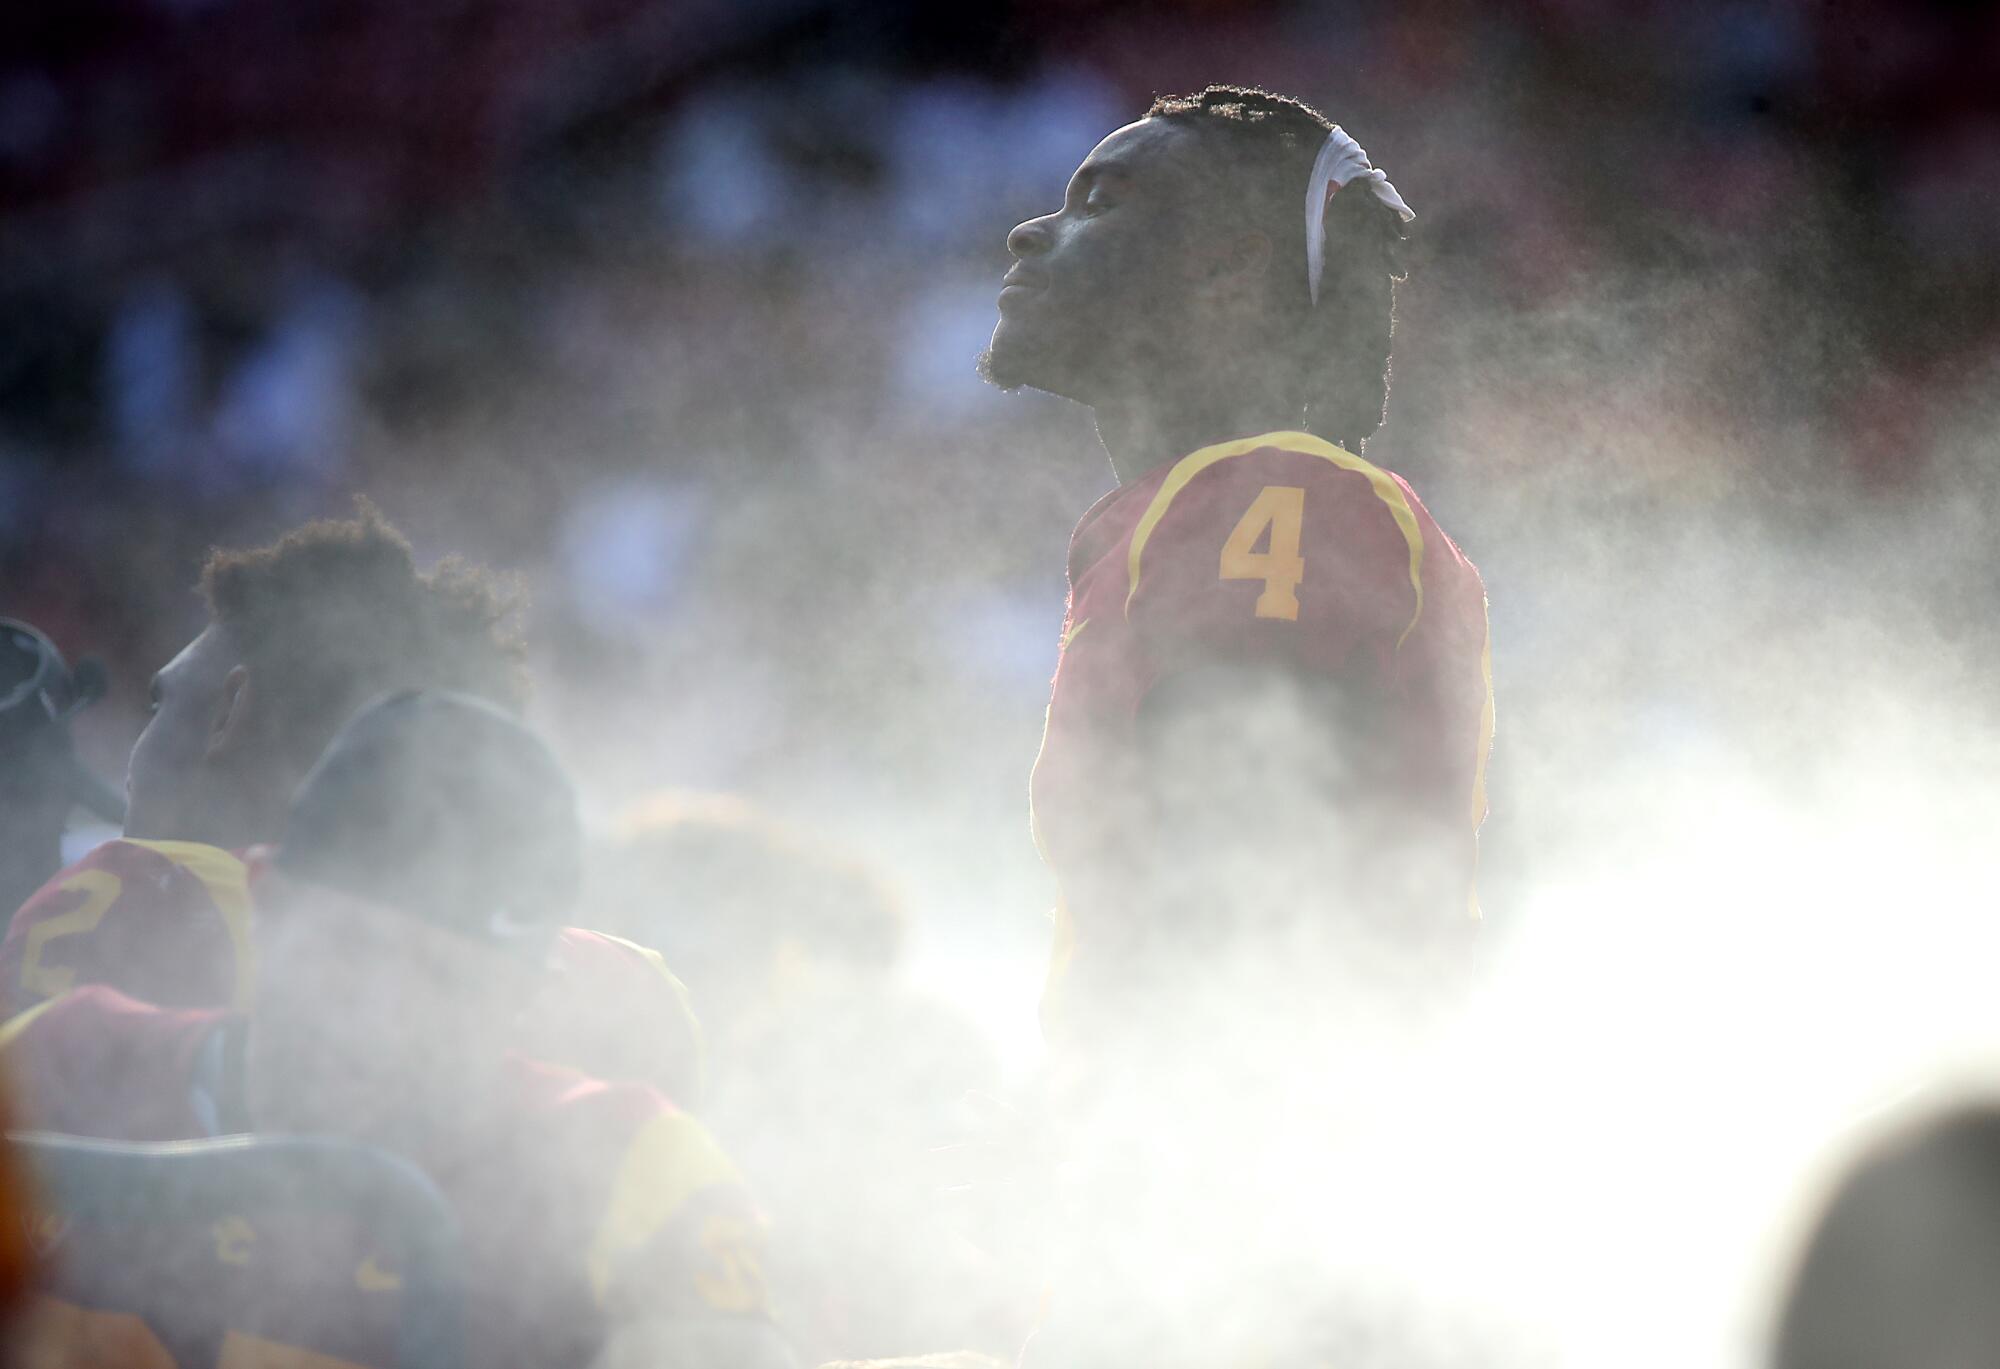 USC wide receiver Mario Williams cools off in the mist of a sideline fan during the Trojan's home opener against Rice.